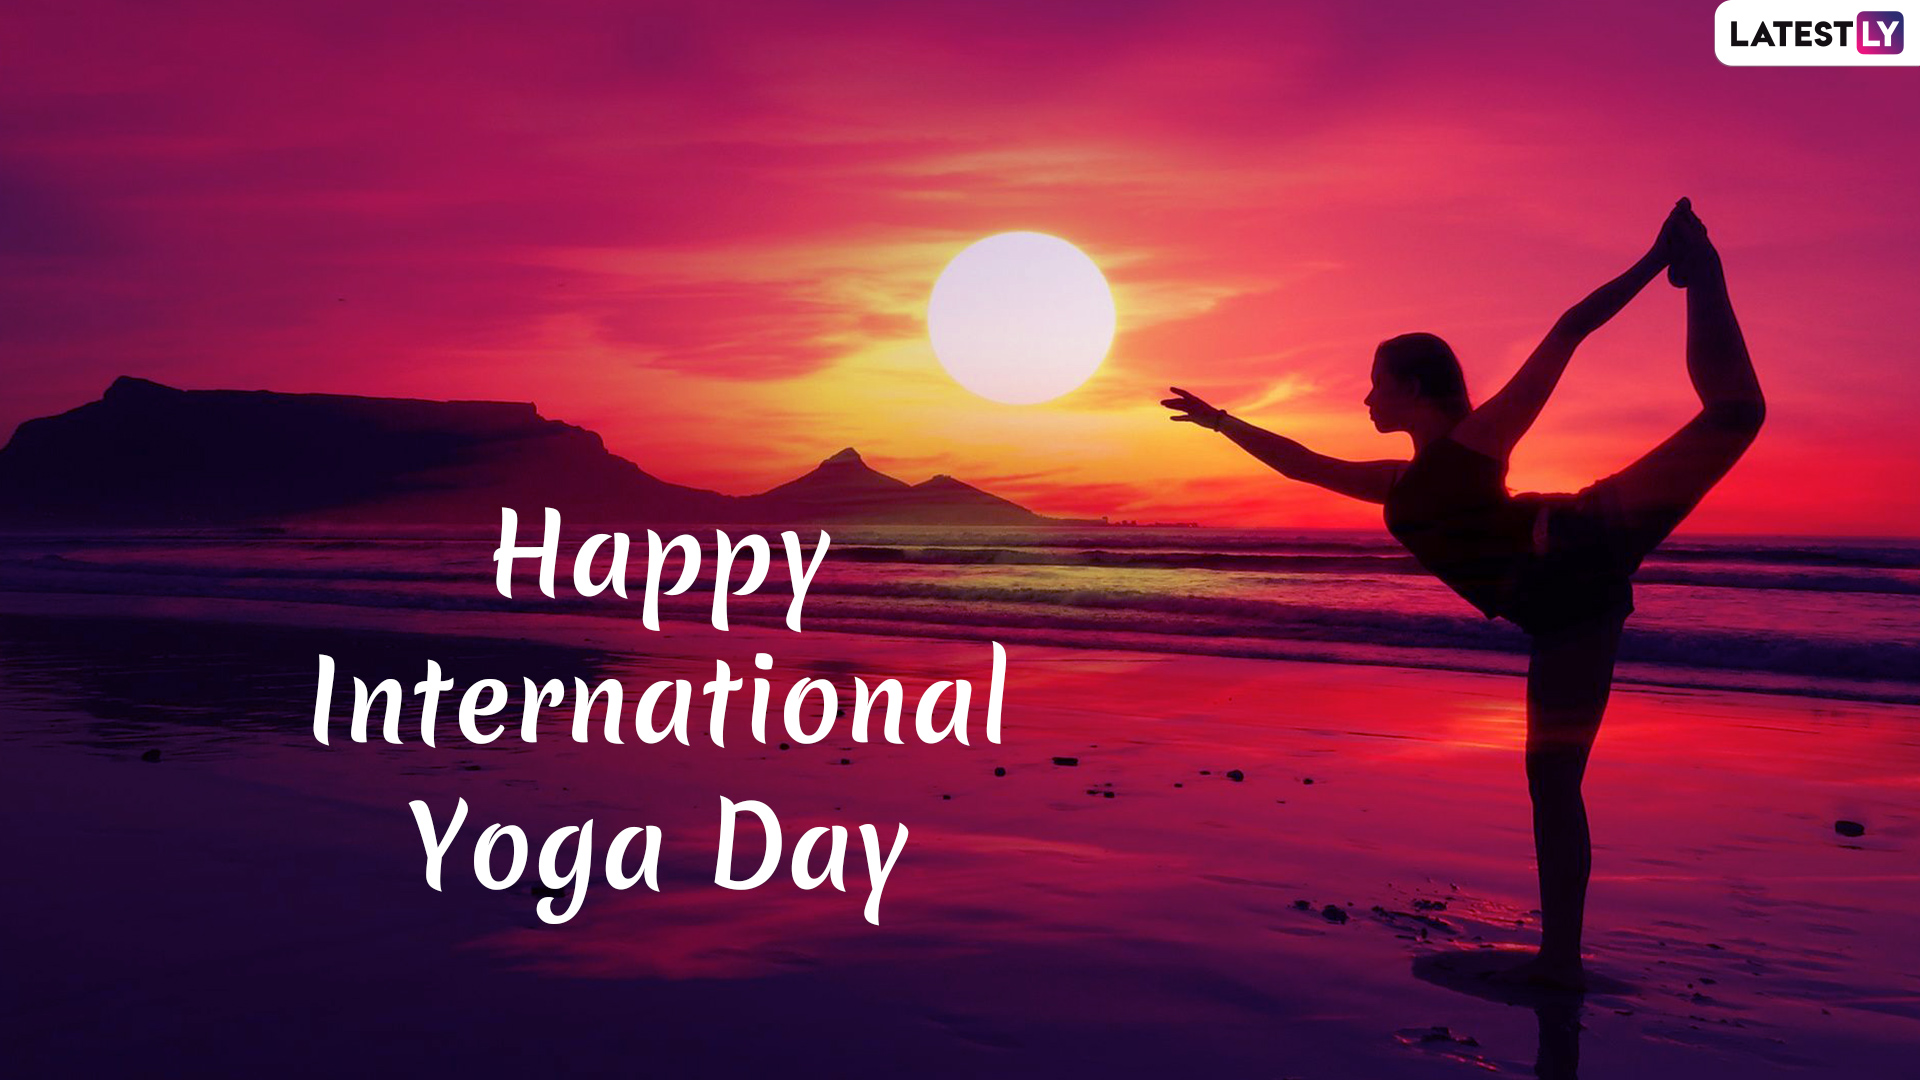 Happy International Yoga Day 2021: Wishes, messages, quotes